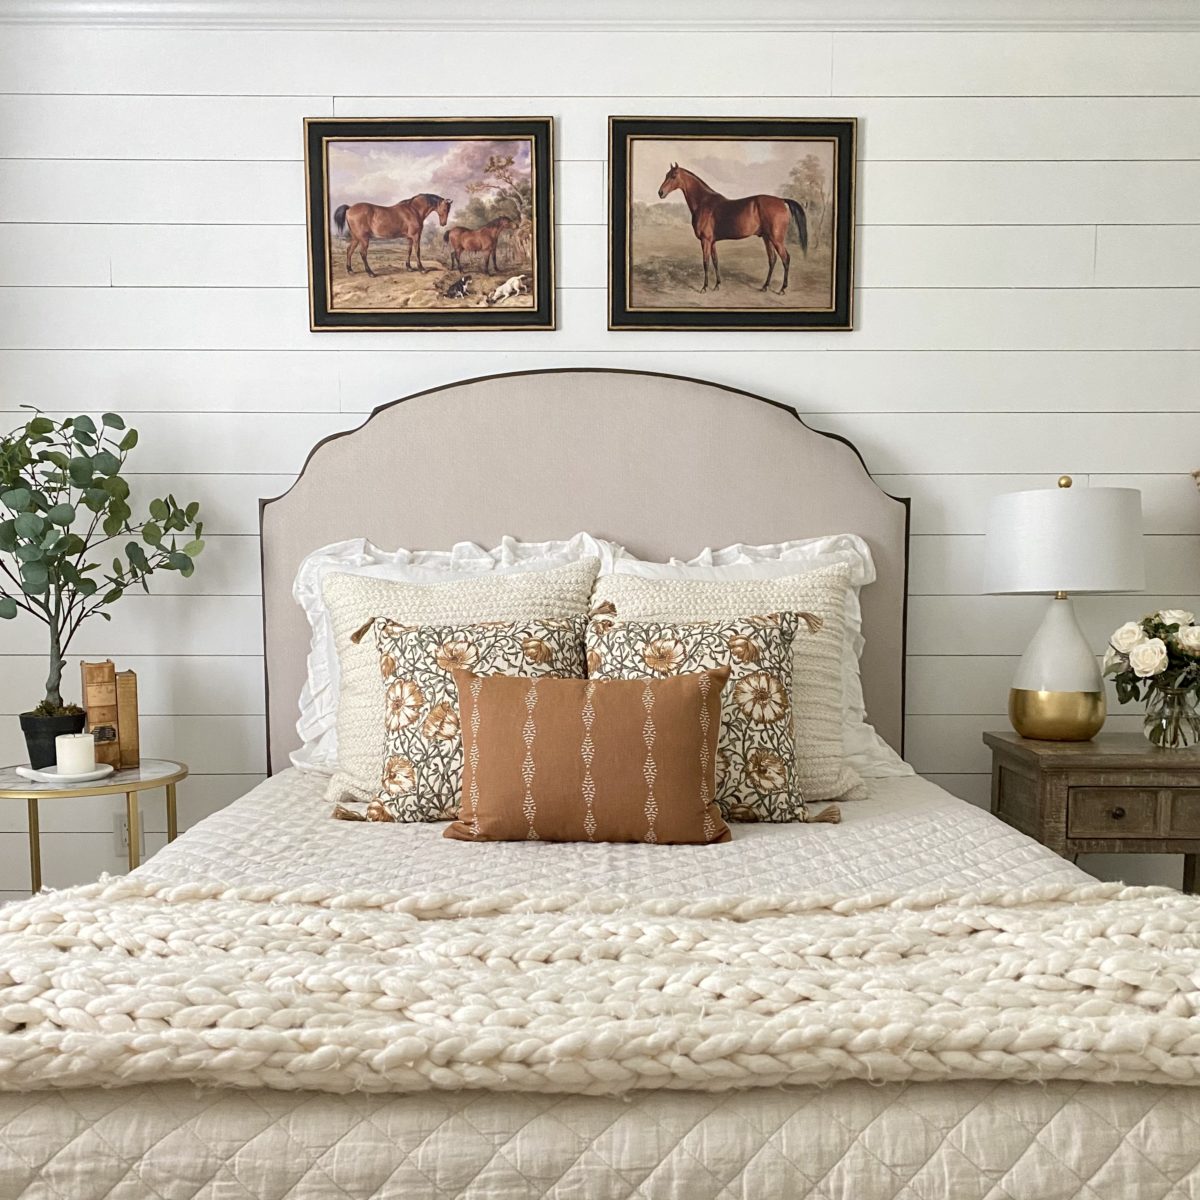 Eauropean farmhouse style Wesley Allen Chamberlain bed headboard with pillows on the bed below it. Above on the wall are horse prints and to the sides of the beds are nightstands with a lamp, flowers, and books on them.